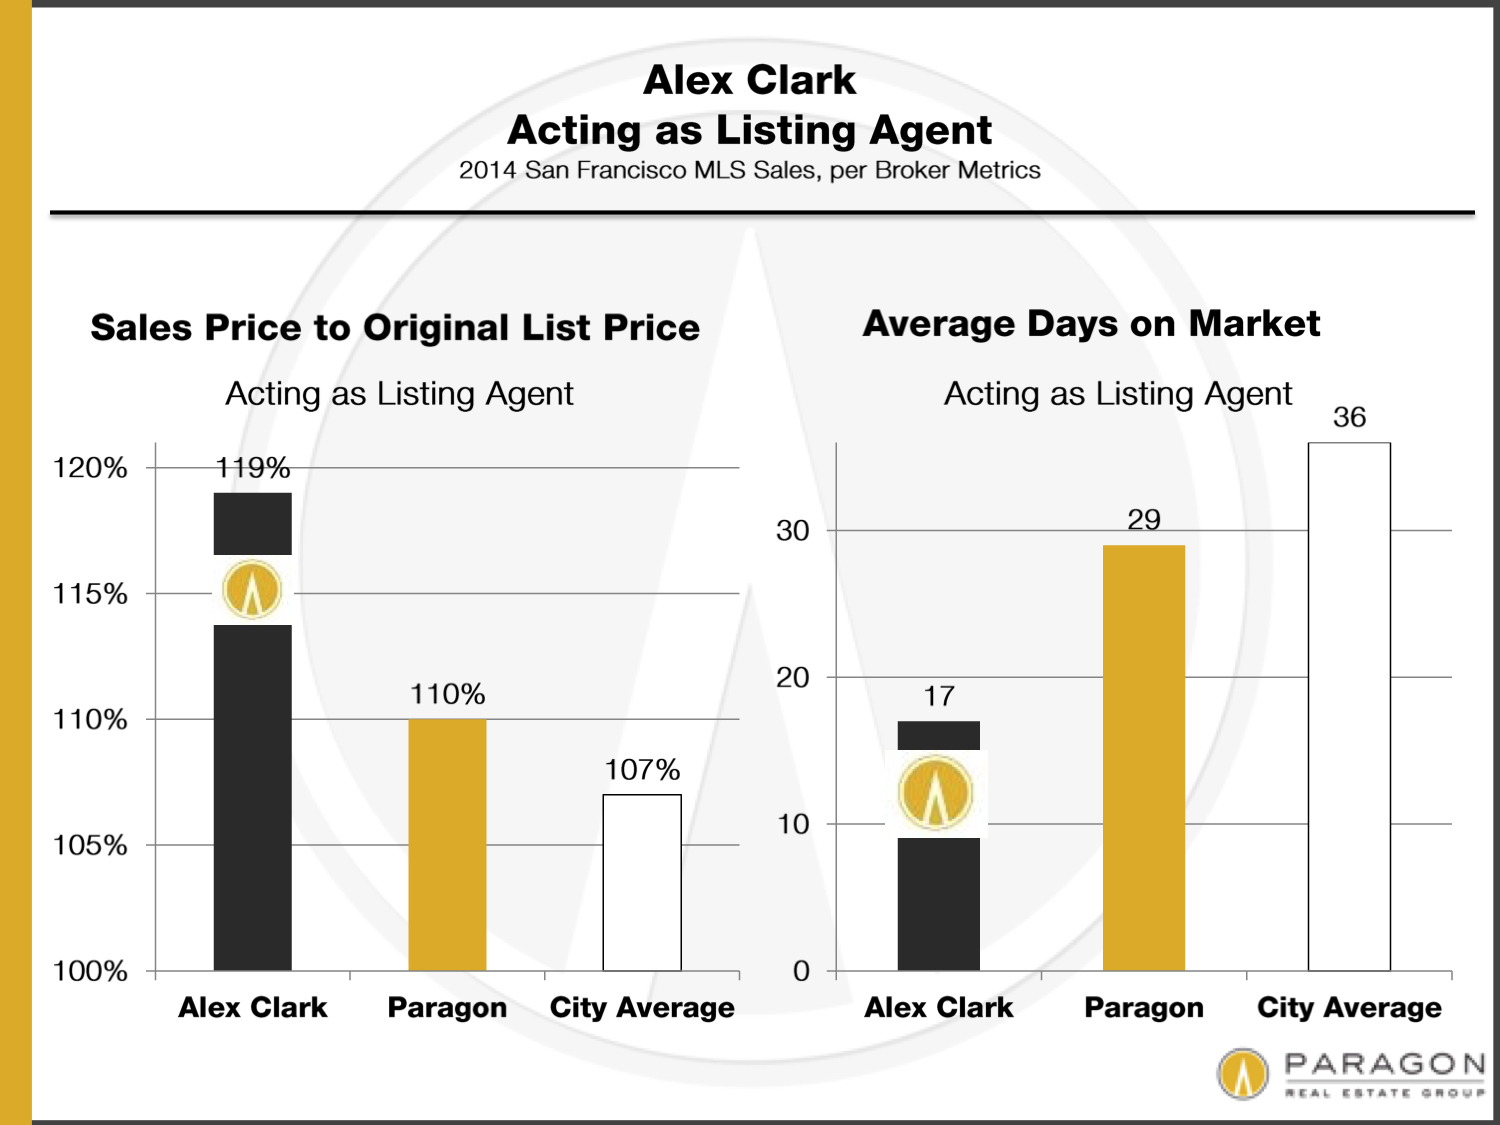 My listings sell more over and faster than average